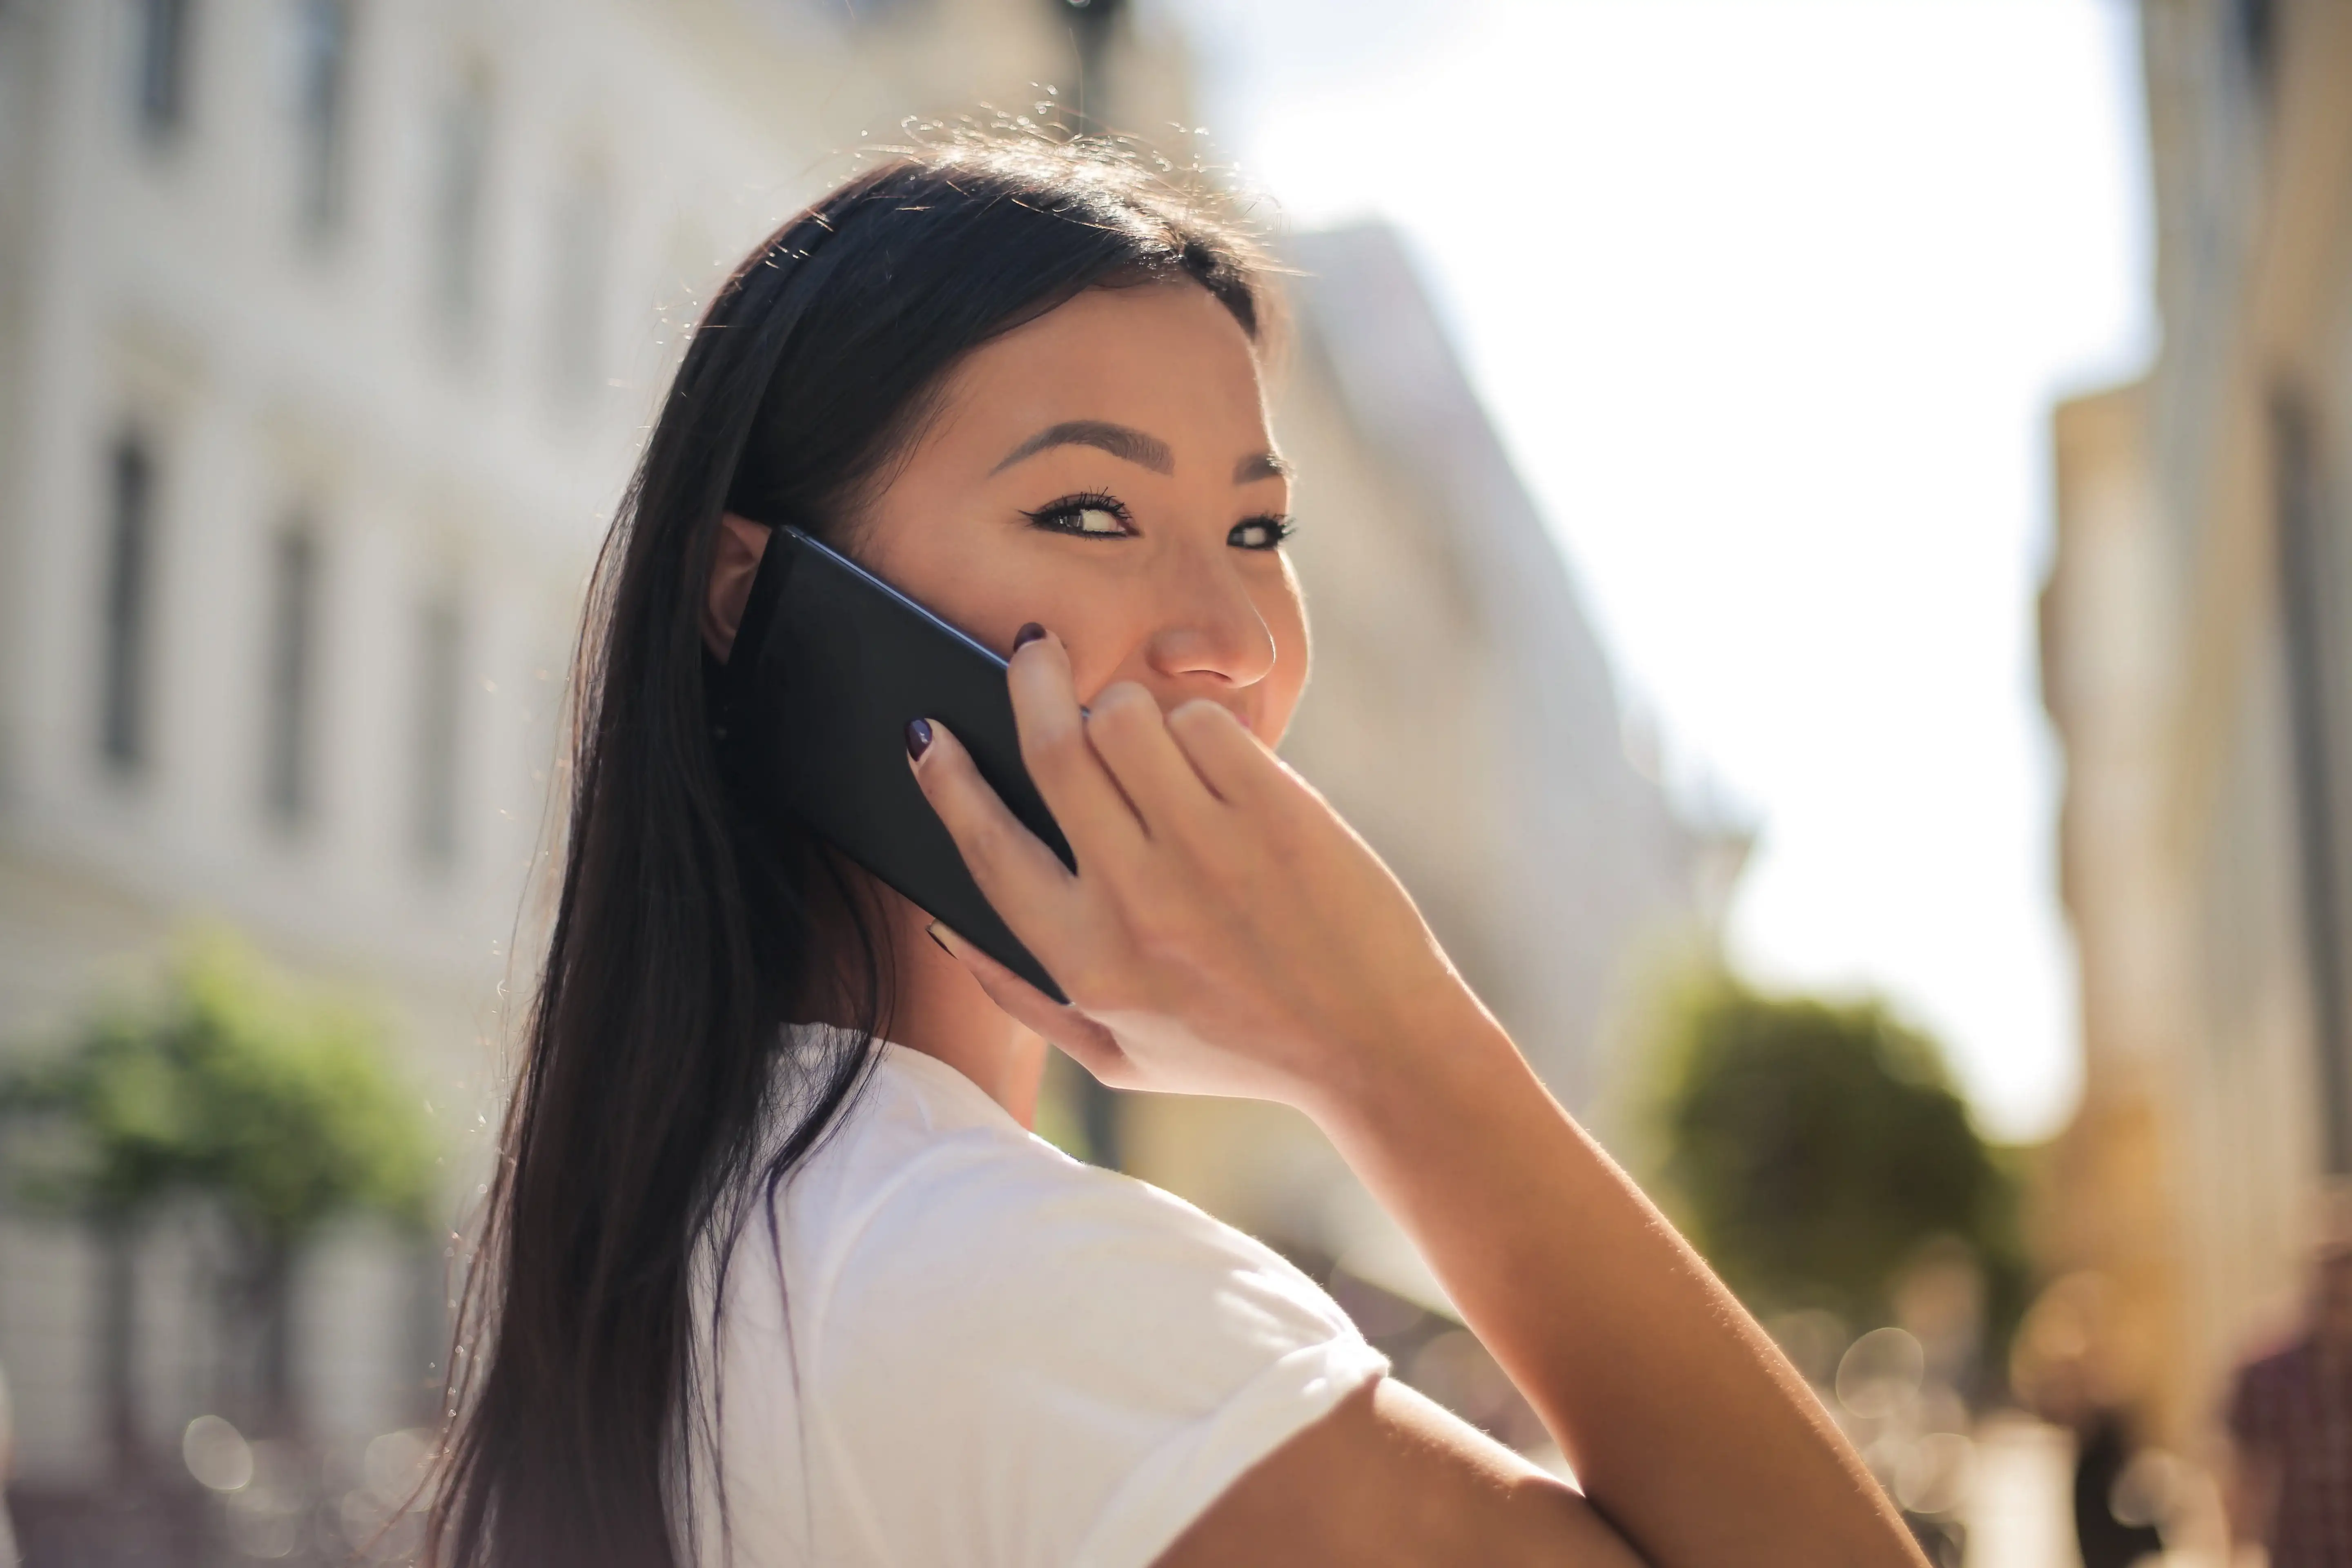 Cold Calling vs. Outbound Calling - What's the Difference?